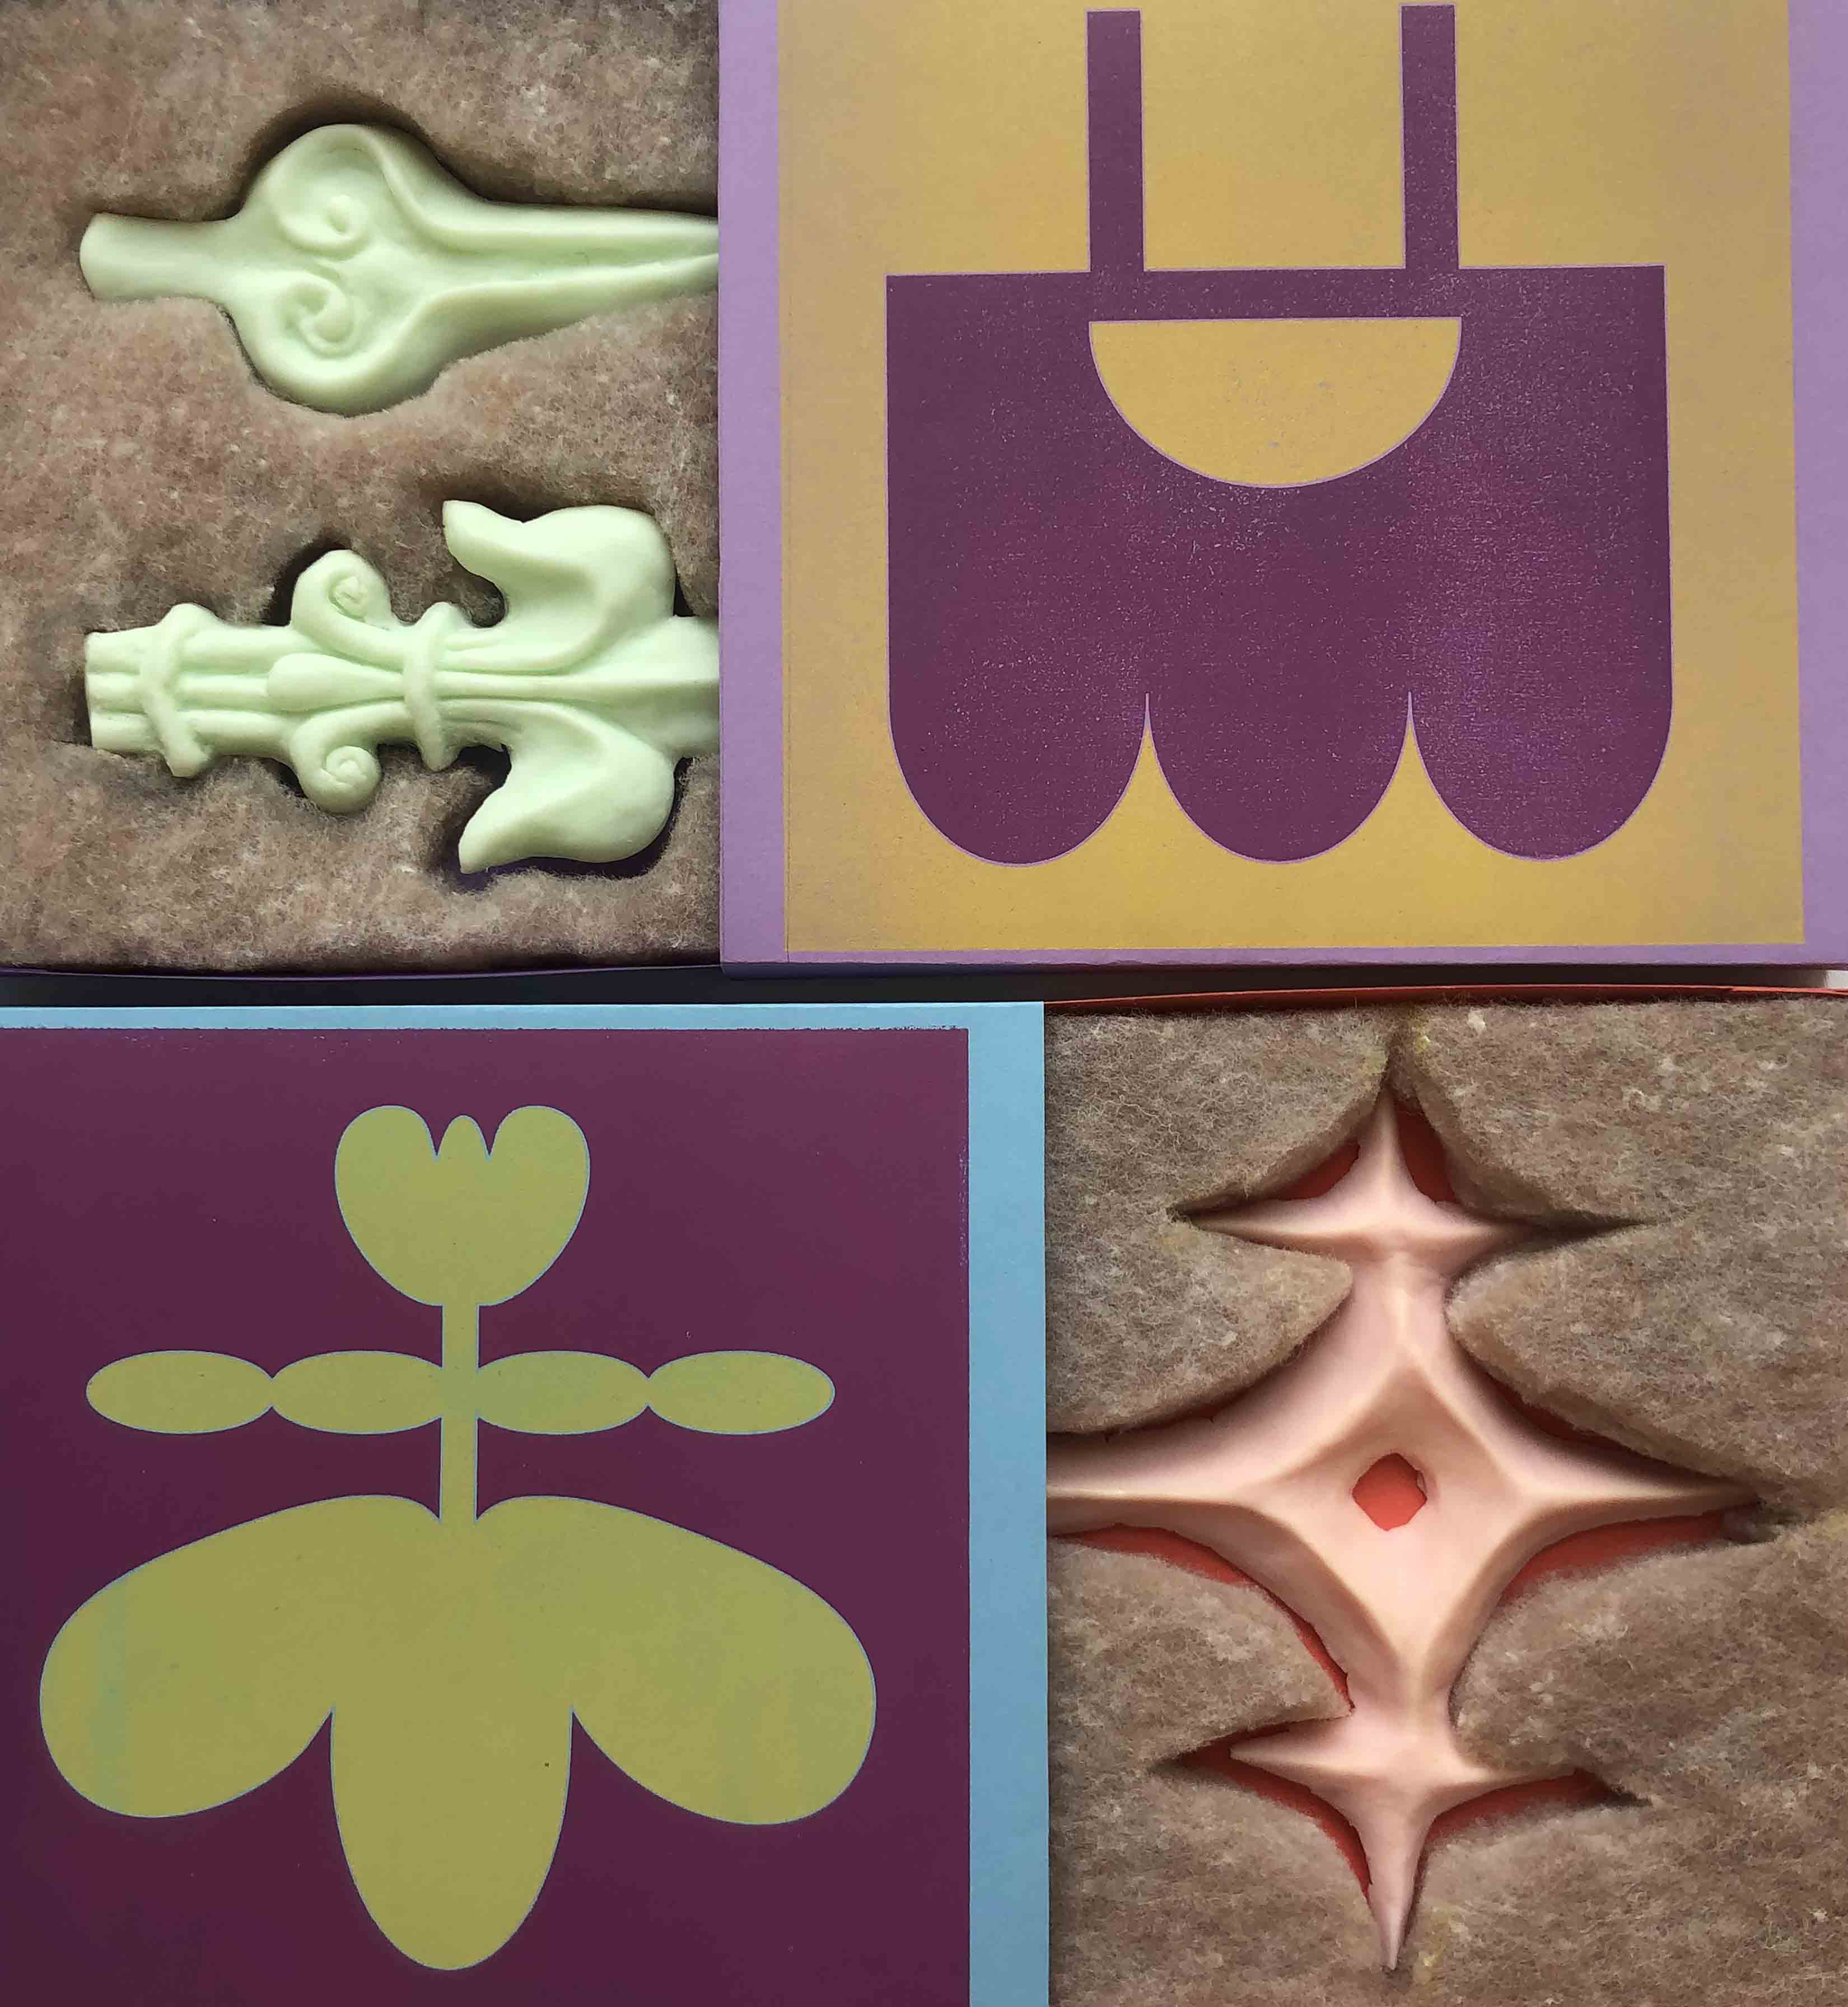 soaps nested into coloured card packaging, relief printed with floral motifs